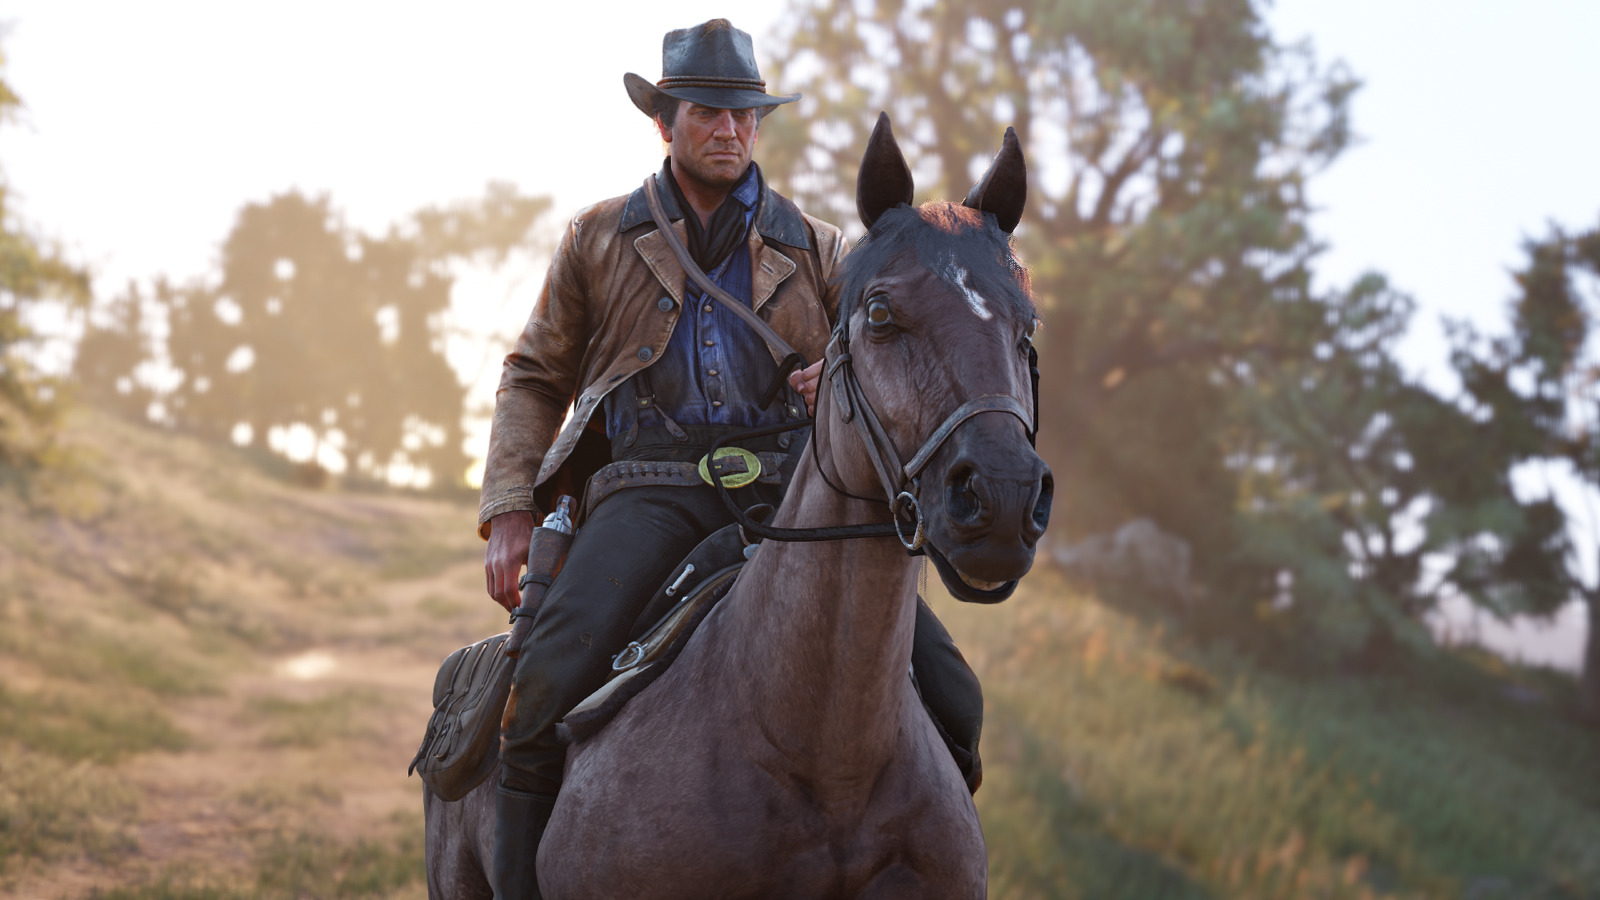 New Red Dead Redemption 2 trailer shows off first-person mode and beard management